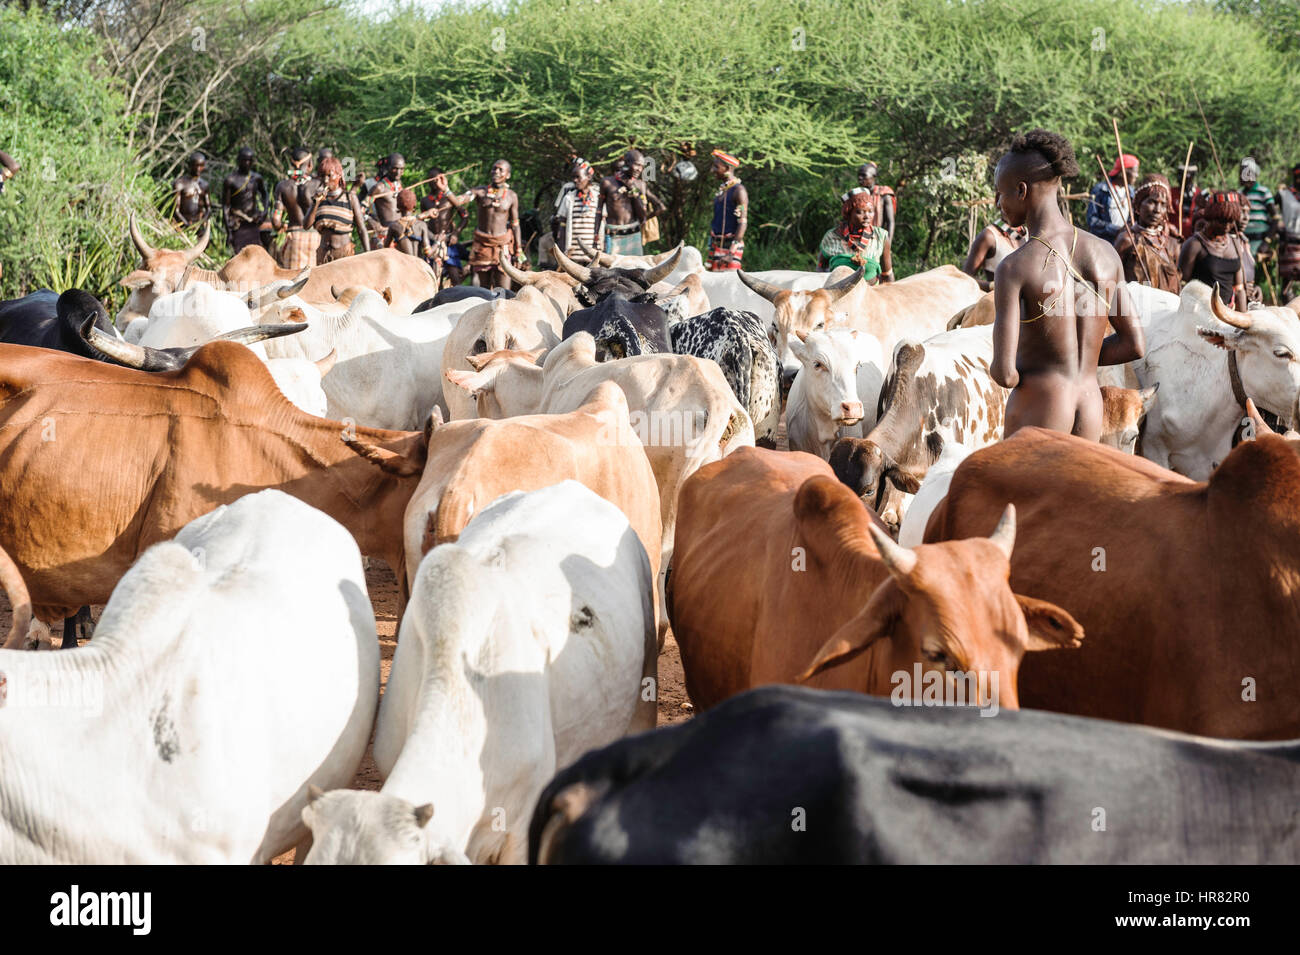 Gathering the cattle for a bull jumping ceremony. A rite of passage from boys to men from the Hamer tribe. Stock Photo